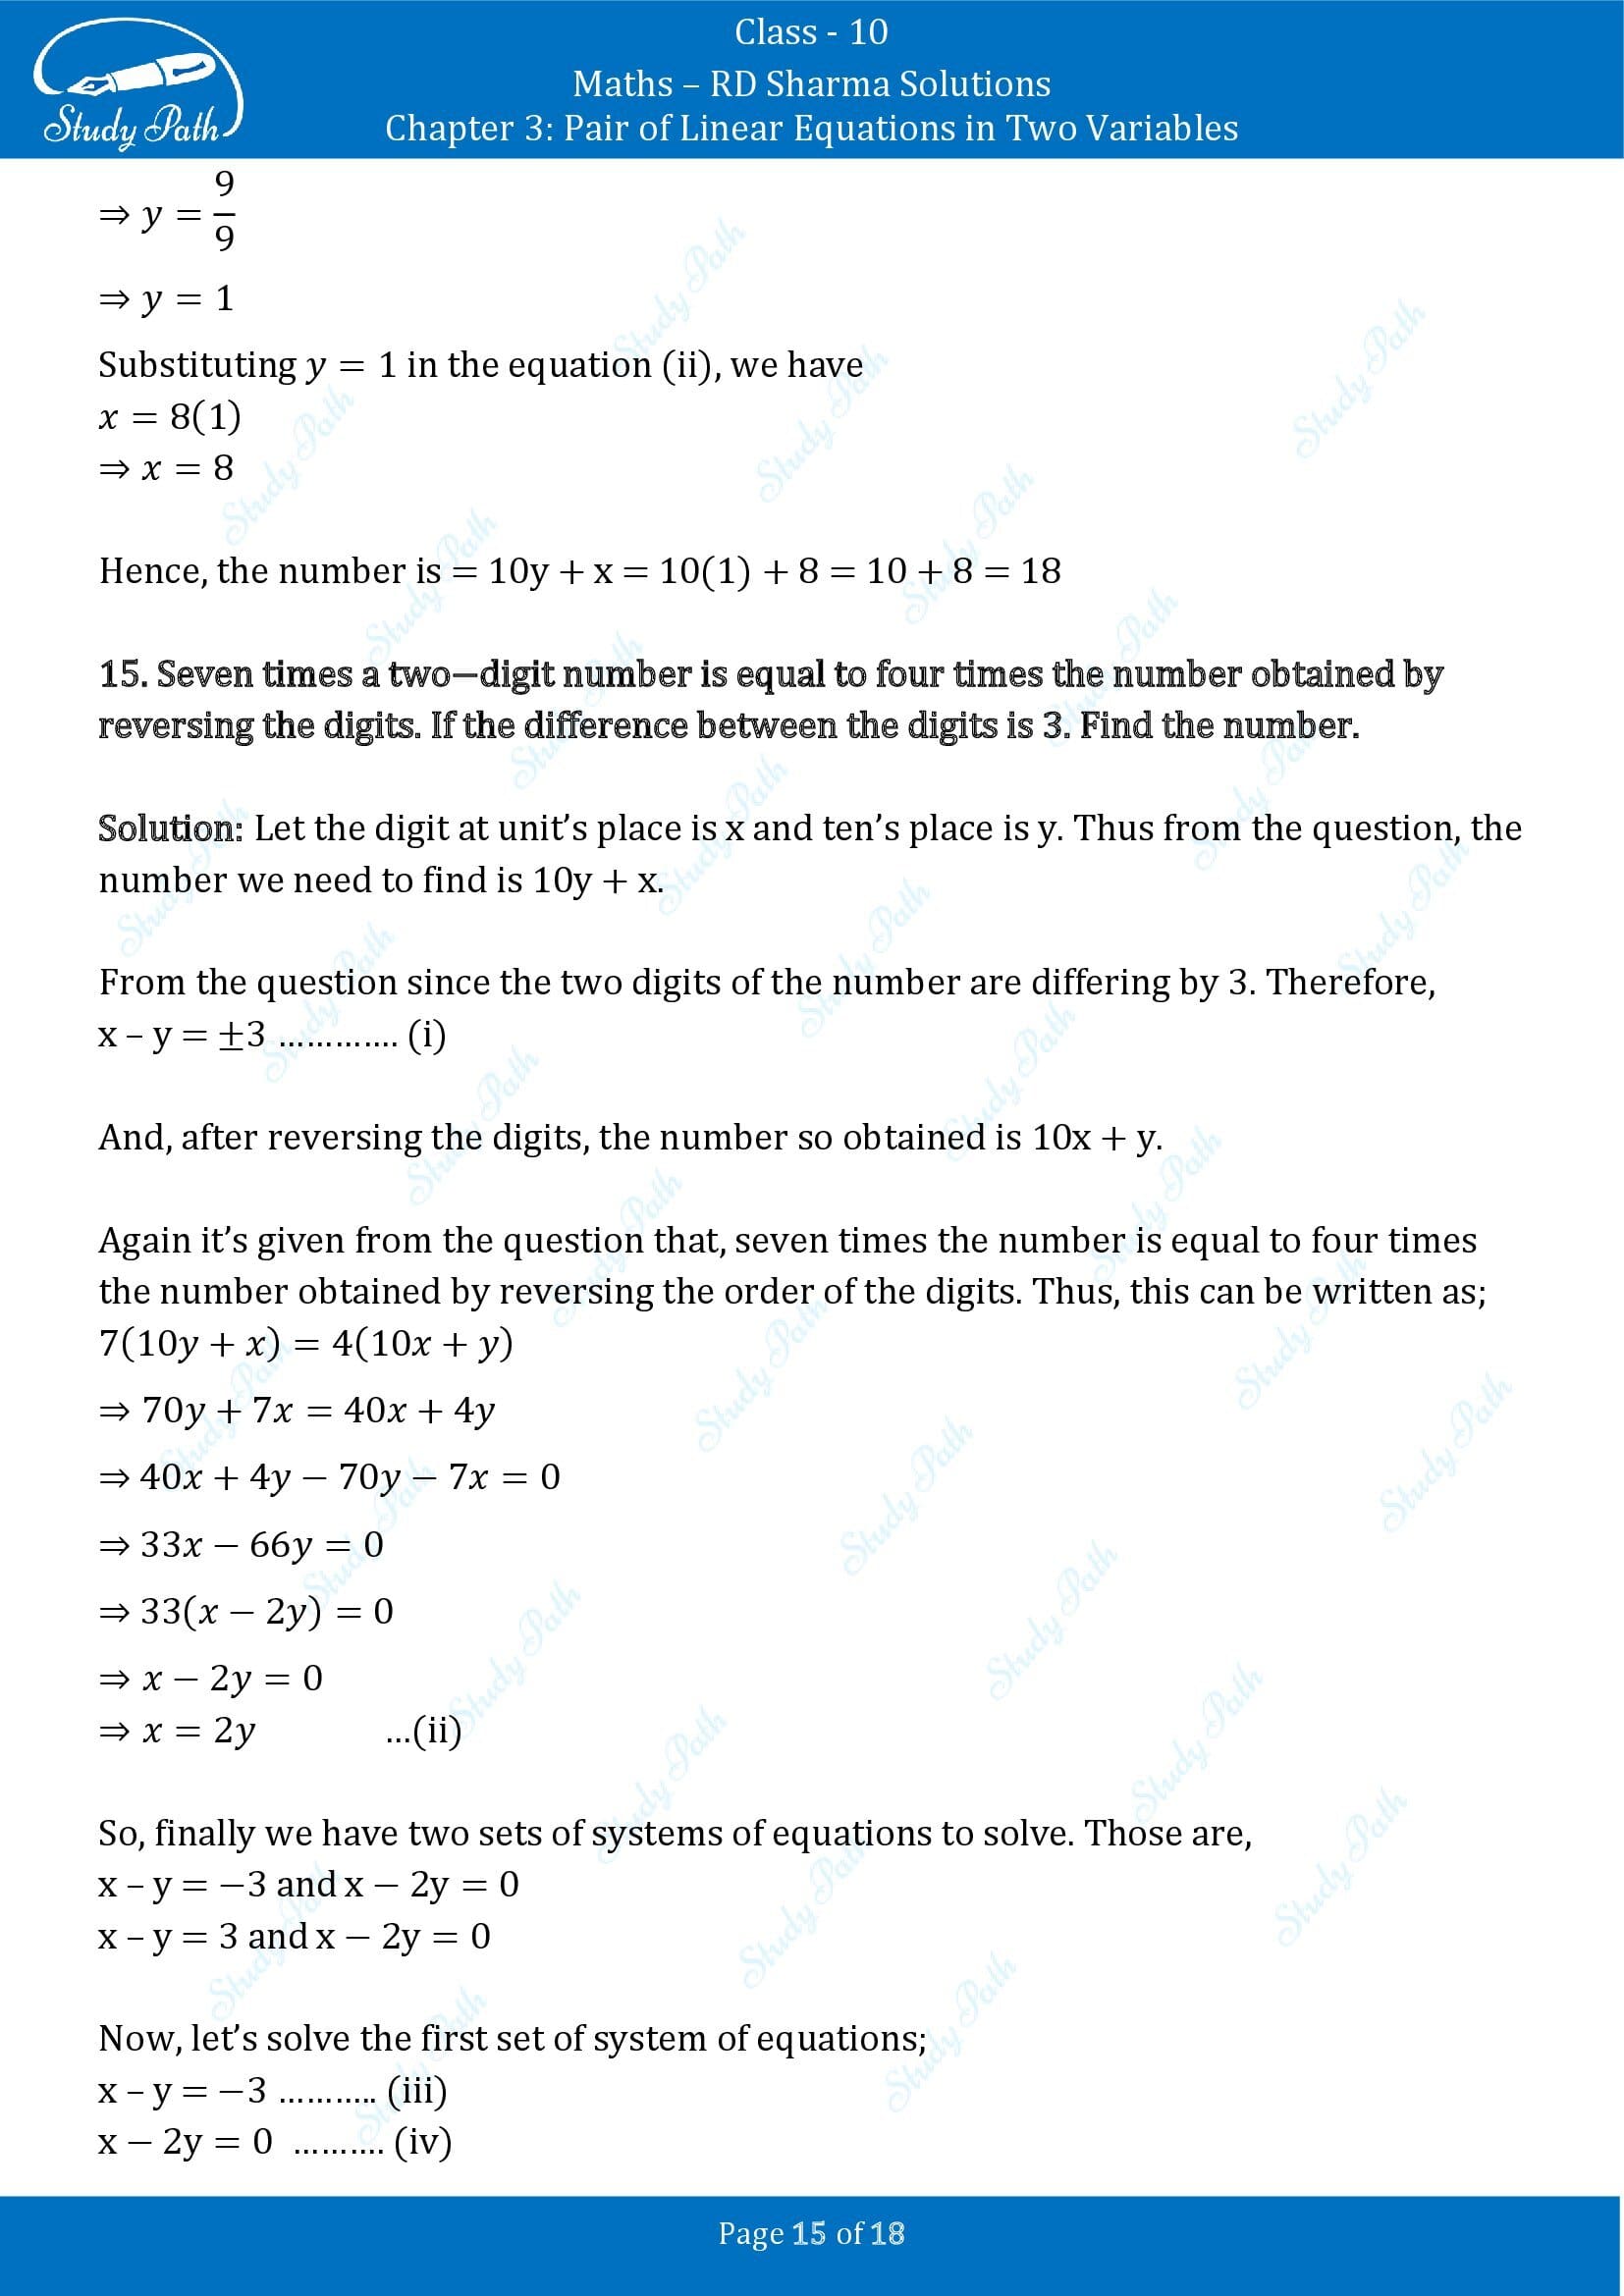 RD Sharma Solutions Class 10 Chapter 3 Pair of Linear Equations in Two Variables Exercise 3.7 00015